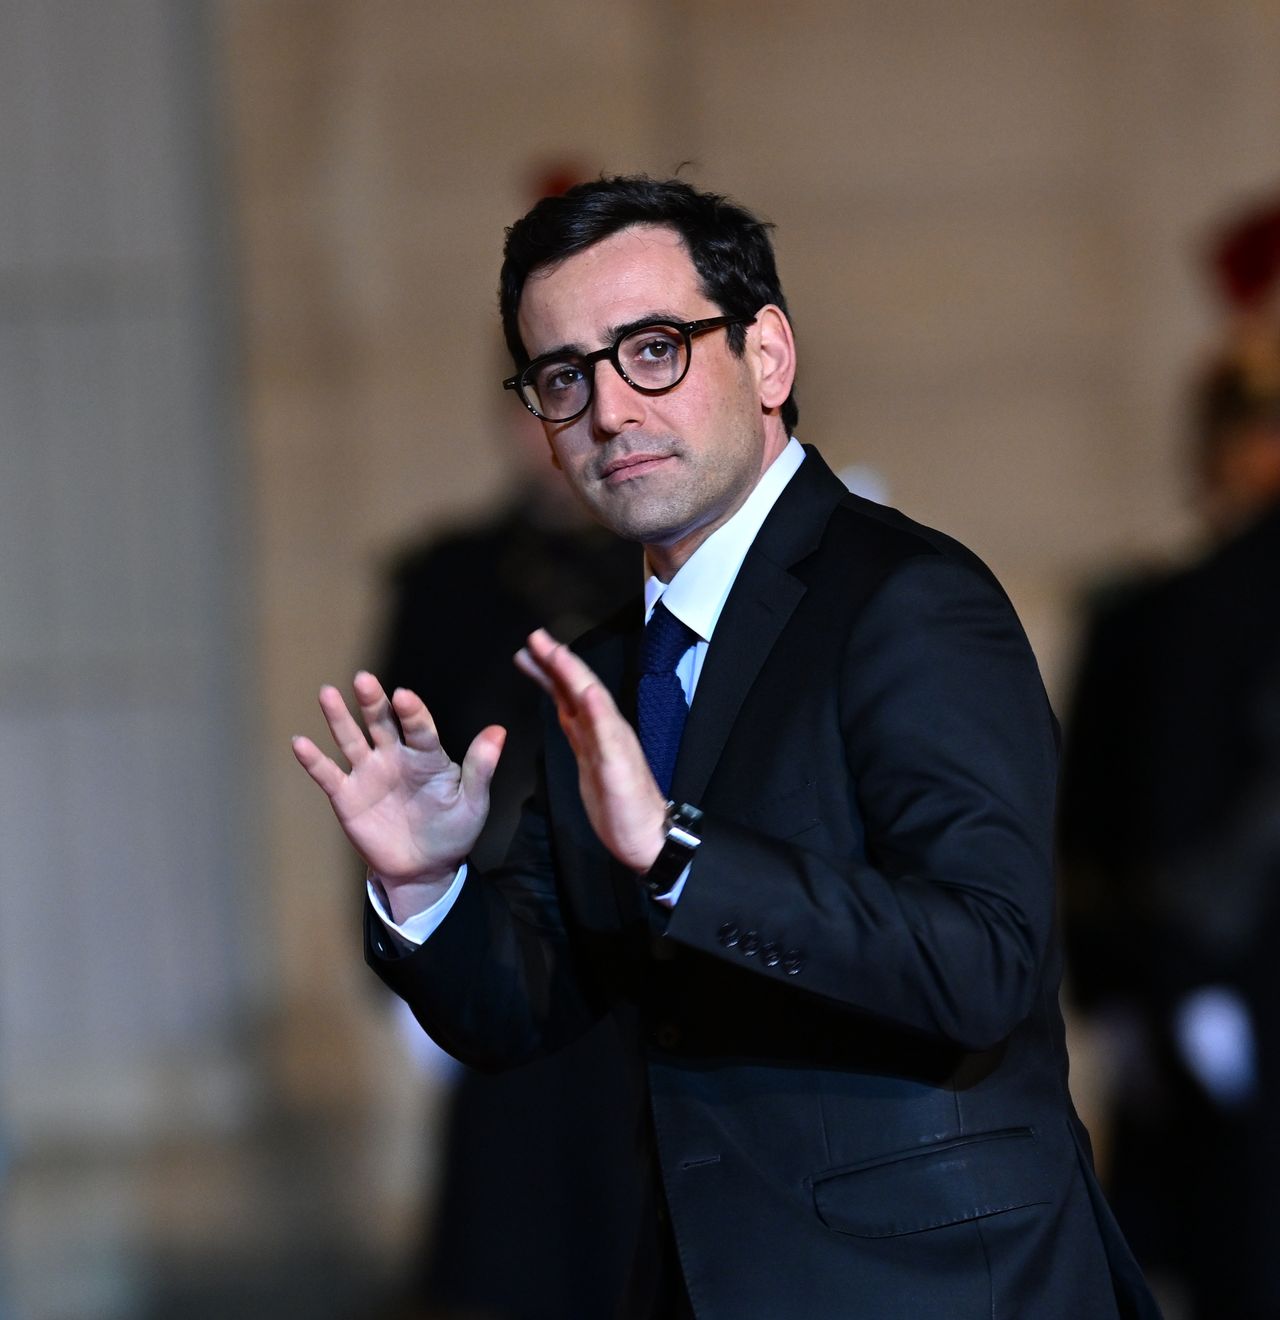 PARIS, FRANCE - FEBRUARY 27: French Foreign and European Minister Stephane Sejourne arrives for an official dinner on the sidelines of the state visit of Emir of Qatar Sheikh Tamim bin Hamad Al Thani (not seen) at the Elysee Palace in Paris, France on February 27, 2024. (Photo by Mustafa Yalcin/Anadolu via Getty Images)